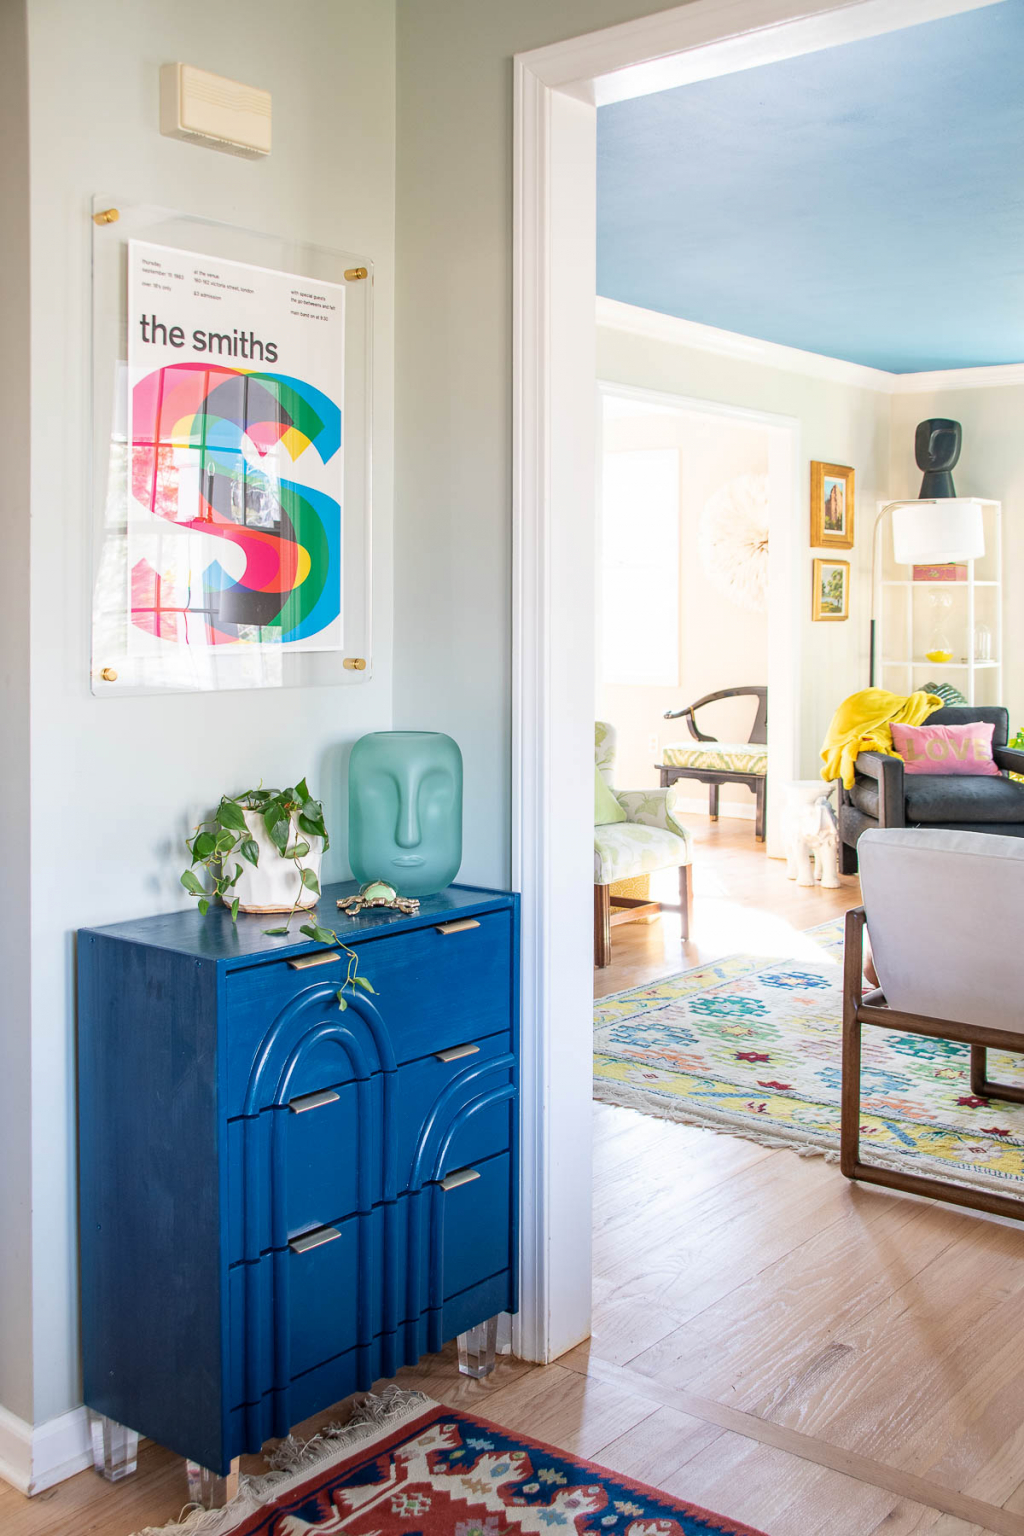 Foyer Reveal: Eclectic Wallpaper and Colorful Details - At Charlotte's ...